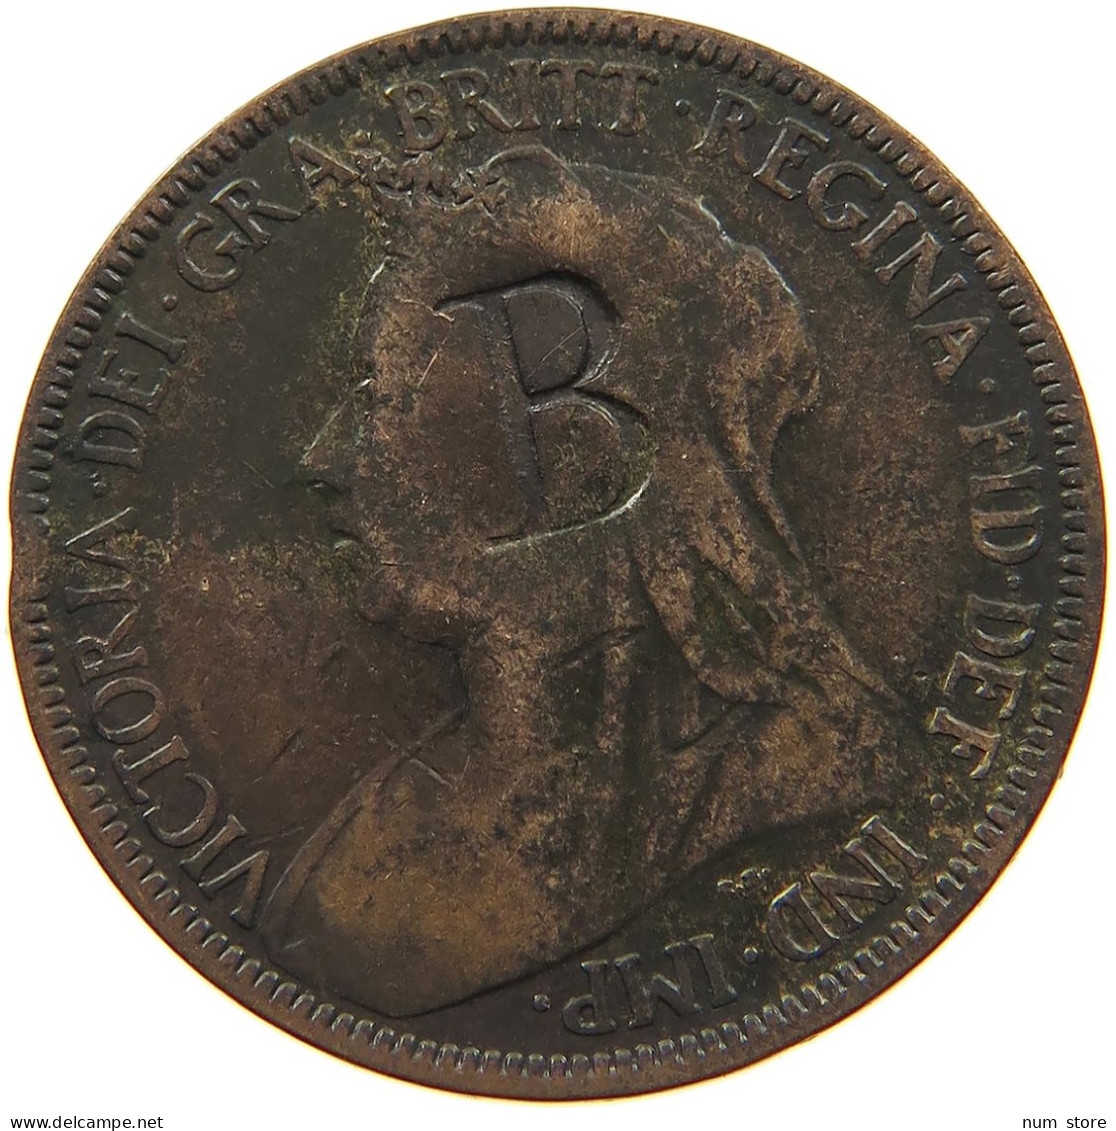 GREAT BRITAIN 1/2 PENNY 1901 VICTORIA 1837-1901 COUNTERMARKED B #MA 101863 - C. 1/2 Penny